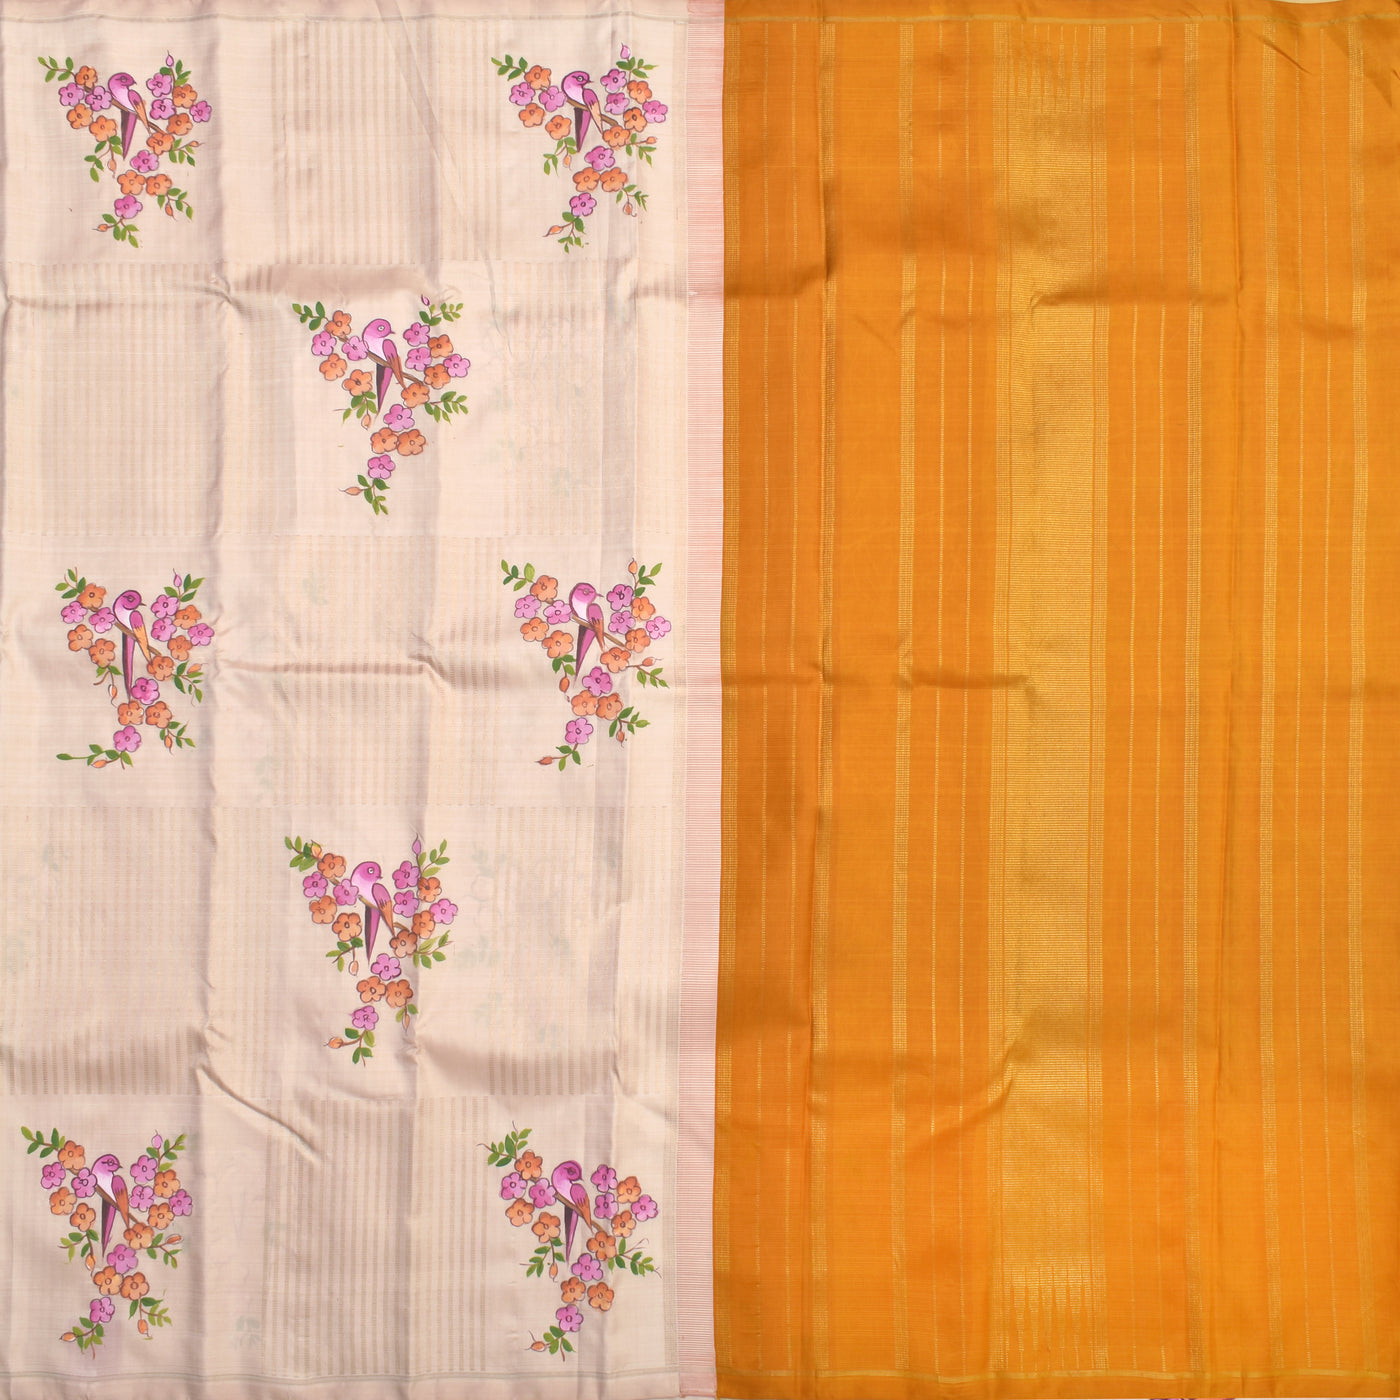 Off White Hand Painted Kanchi Silk Saree with Birds Floral Design